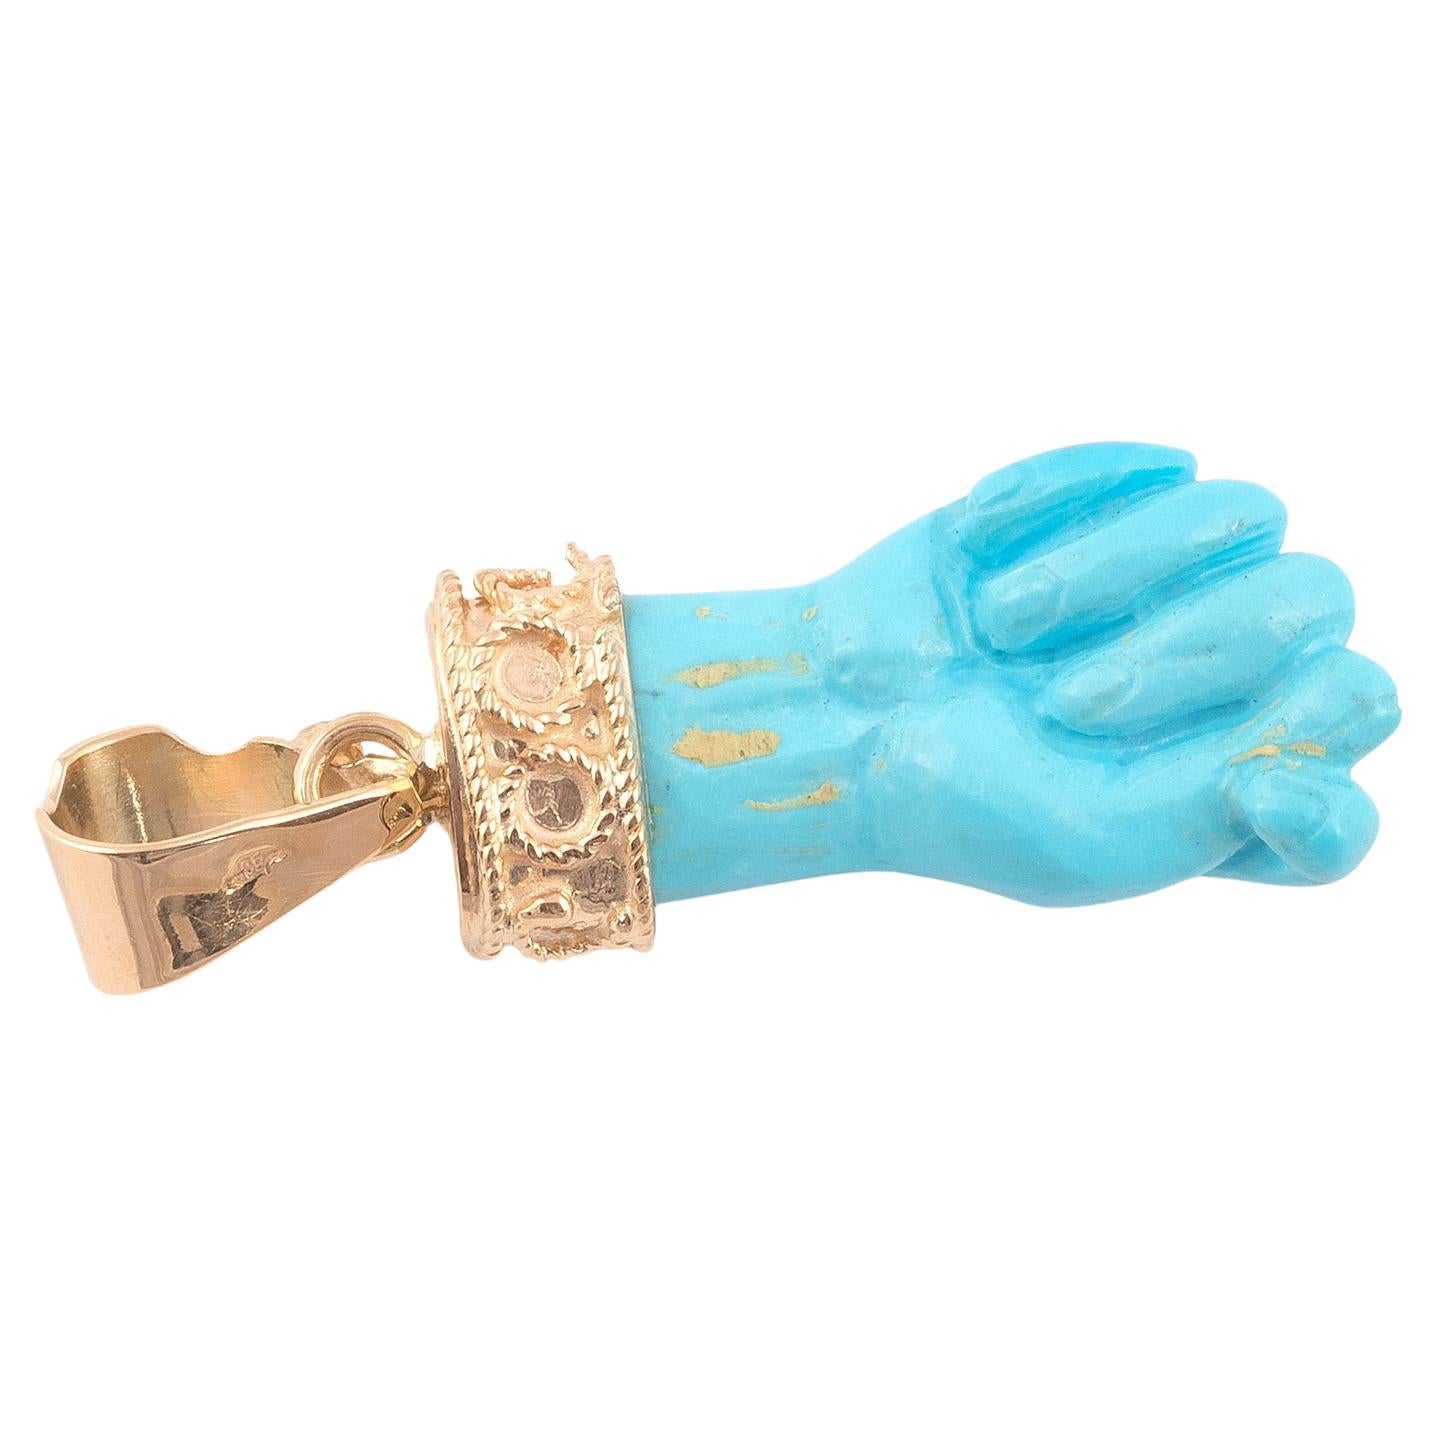 A beautiful figa hand charm made of Turquoise  and set with a 14 karat gold bail. The hand is nicely detailed. The charm is great worn alone or layered with your other favorites. The charm comes without the necklace. 
The figa hand symbol dates back